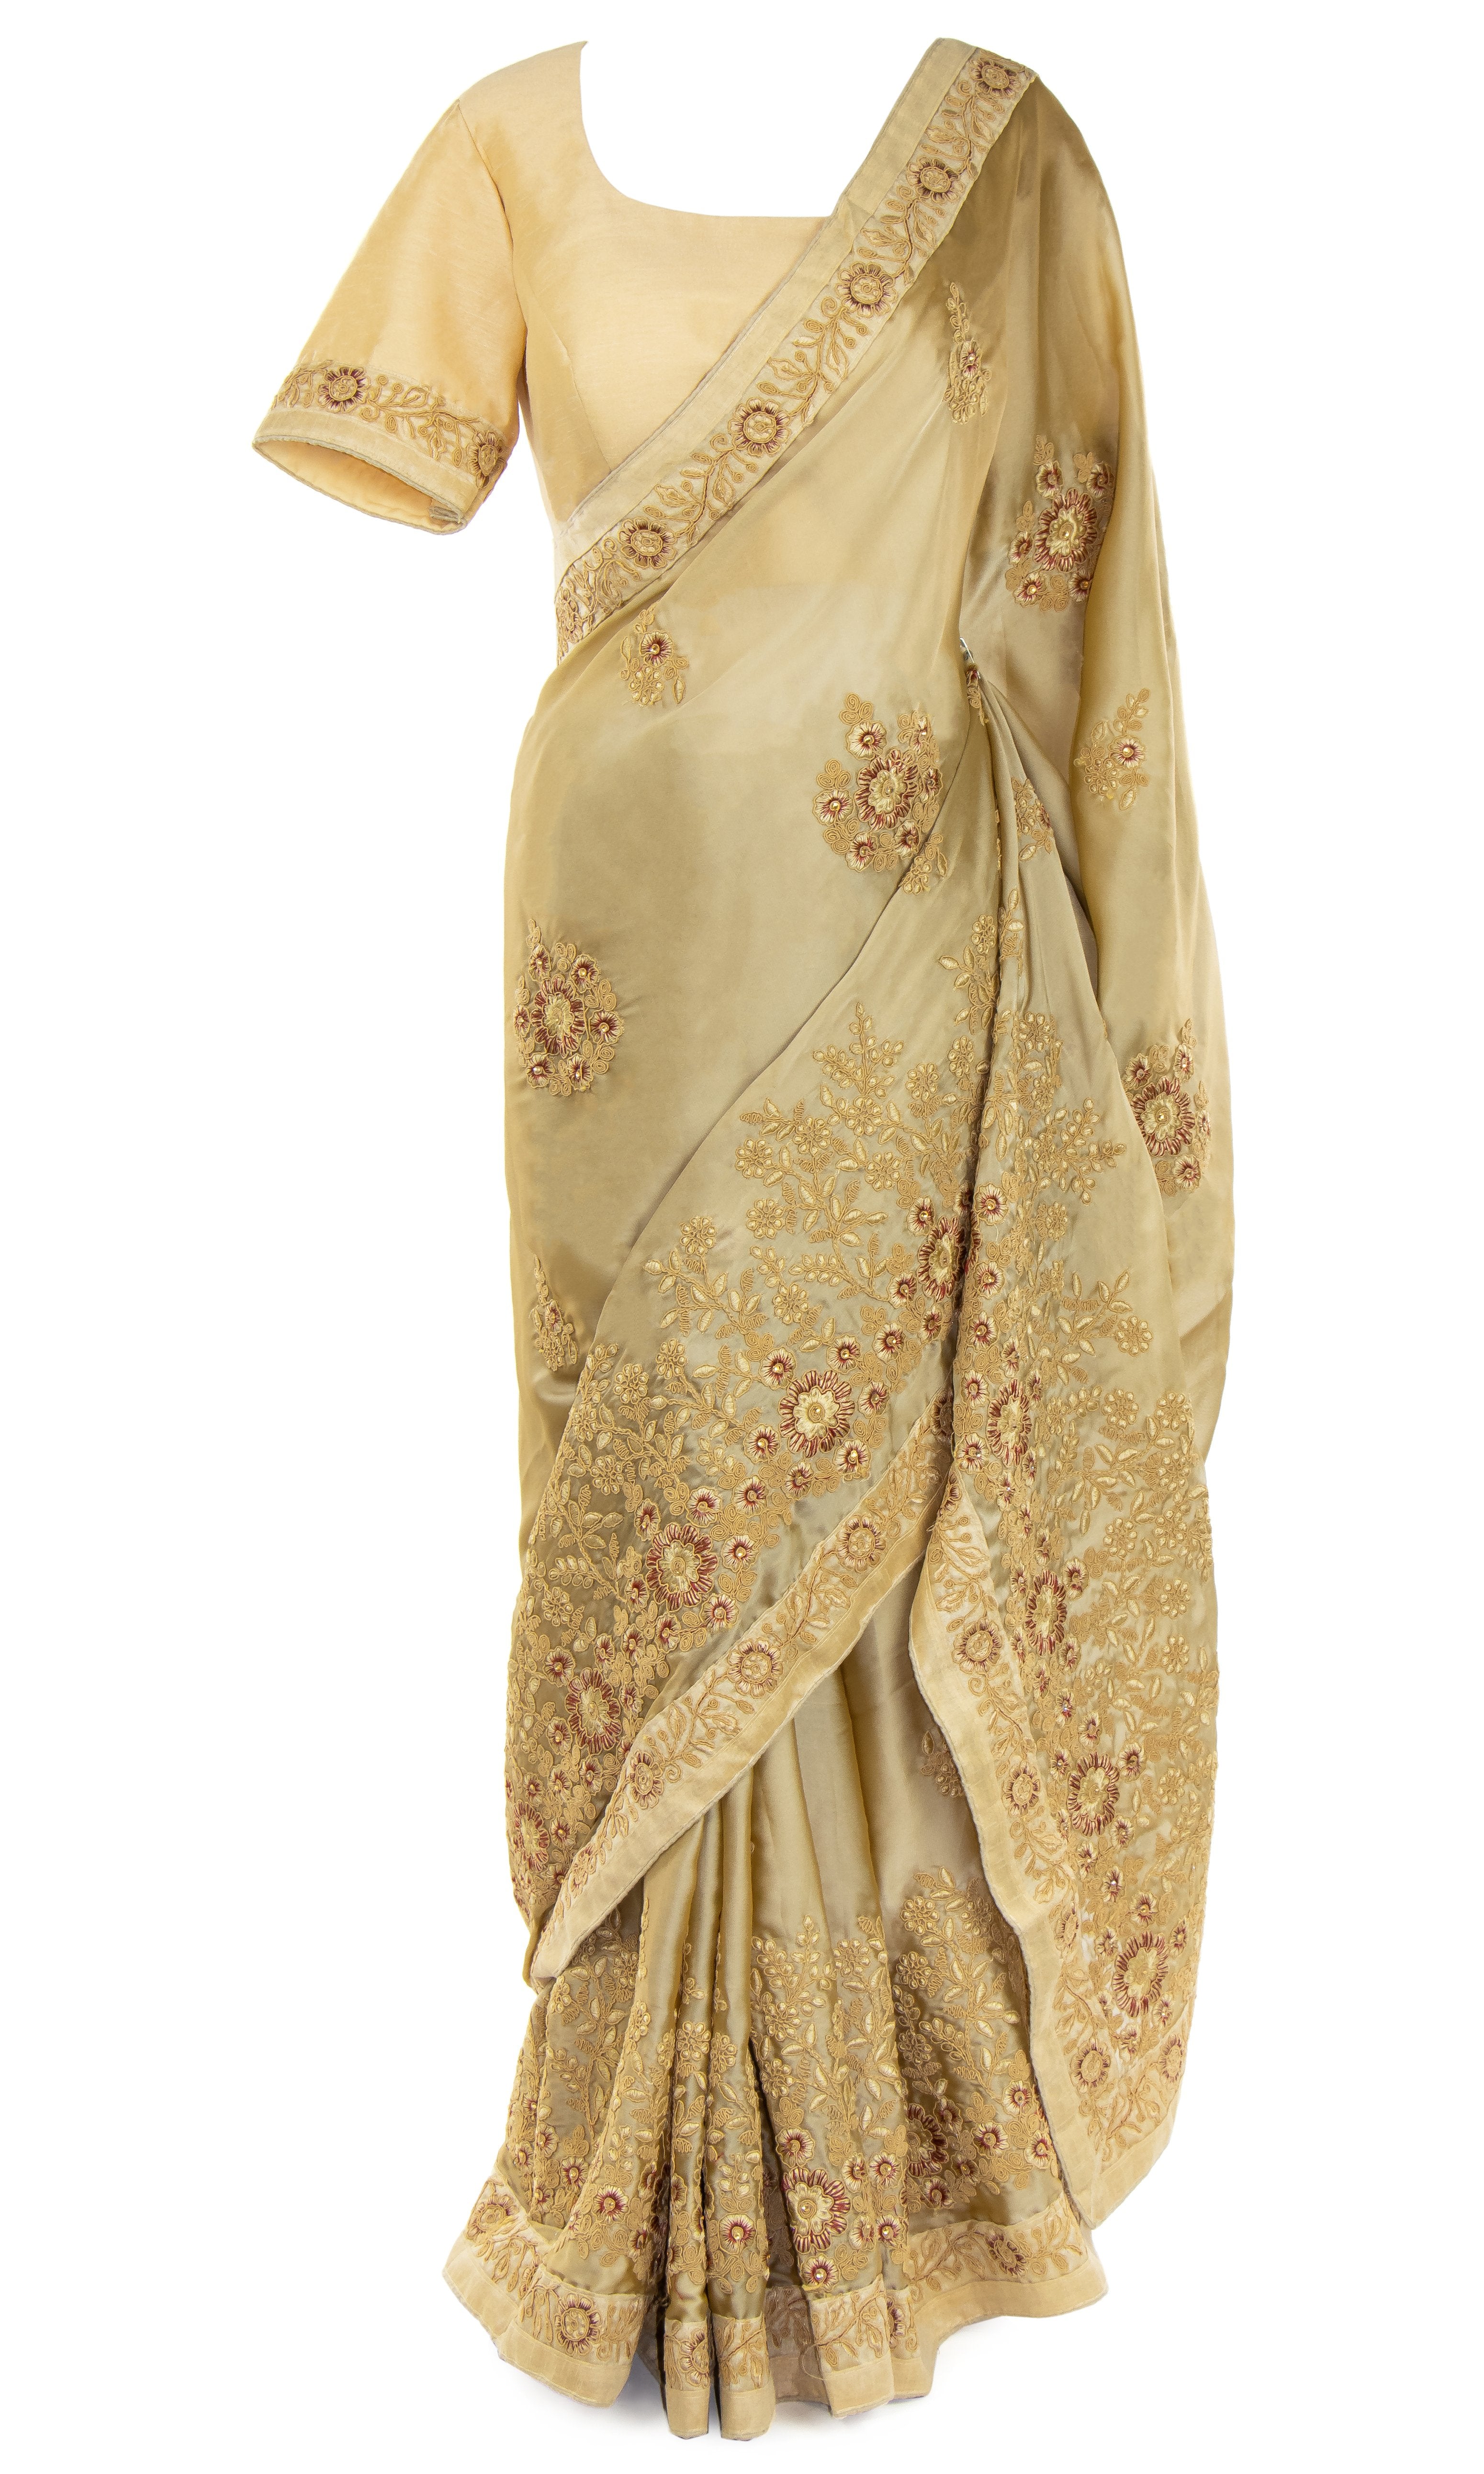 Classic satin silk top paired with a matching Saree embellished with gorgeous gold and maroon florals and stonework.